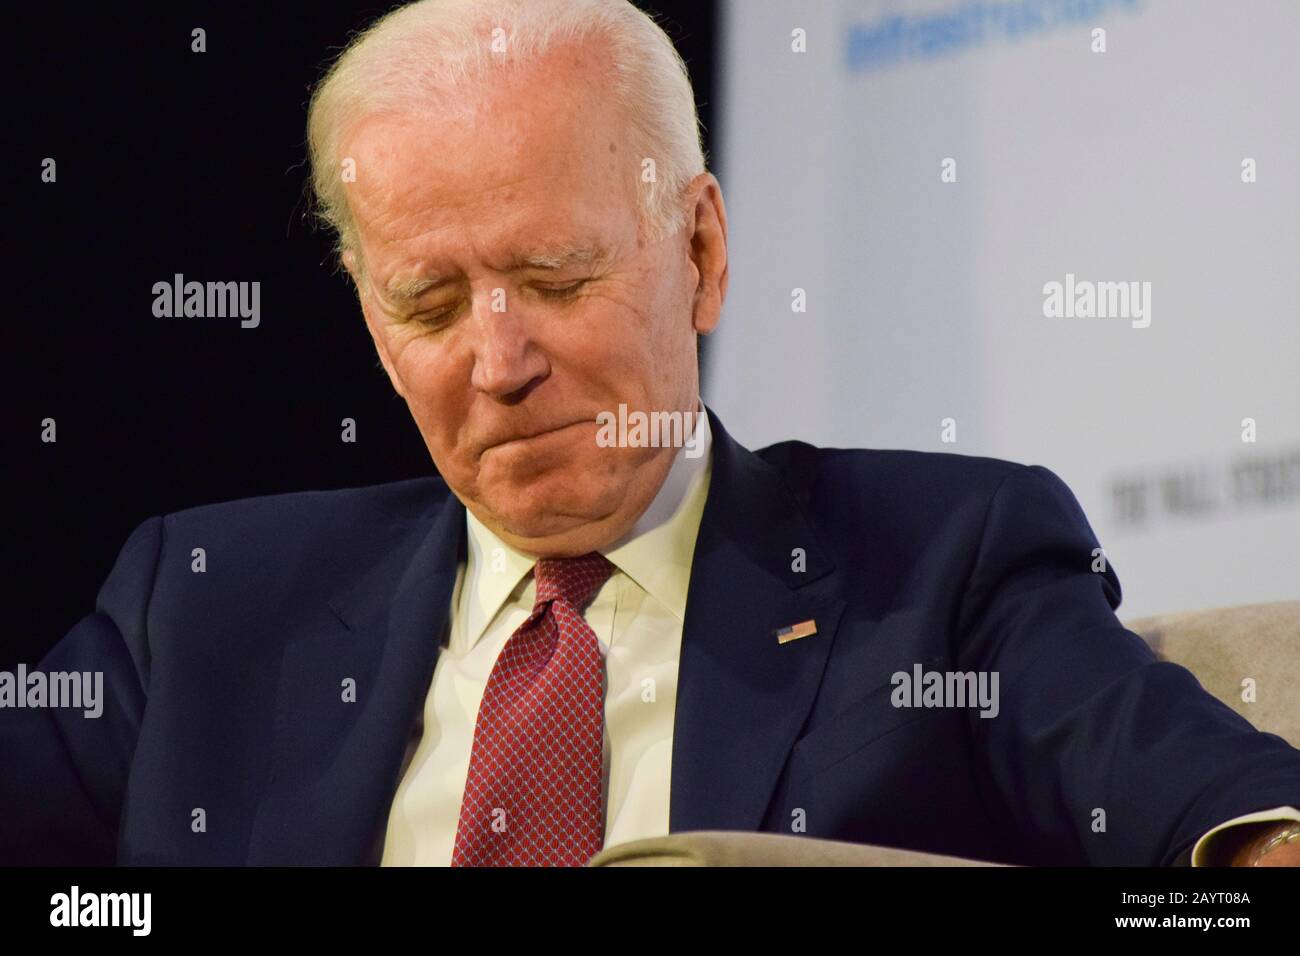 Las Vegas, United States. 16th Feb, 2020. Former Vice President Joe Biden discusses American infrastructure at the Moving America Forward, presidential candidate forum inside the UNLV Student Union on February 16, 2020 in Las Vegas, Nevada. Credit: The Photo Access/Alamy Live News Stock Photo